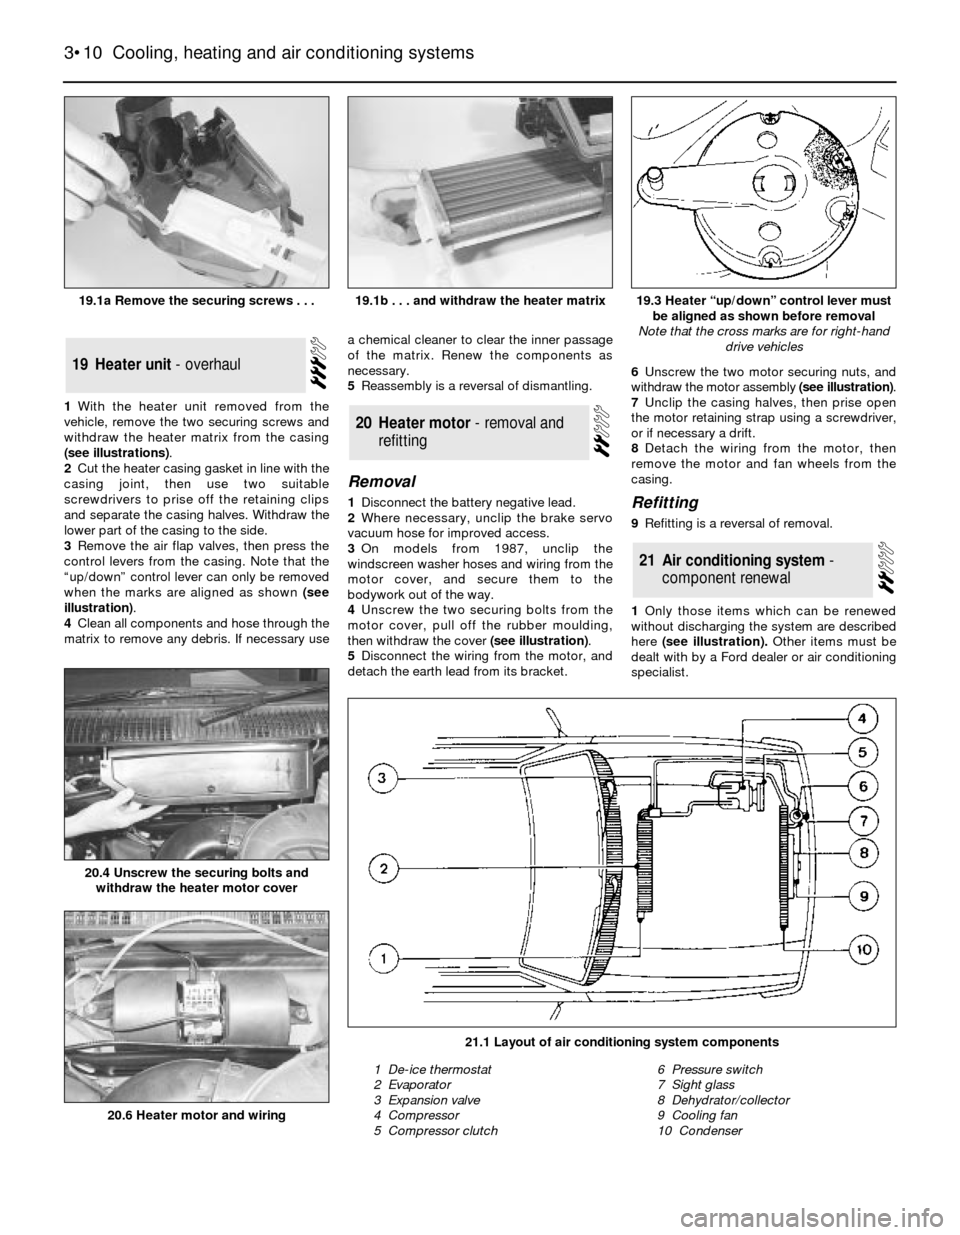 FORD SIERRA 1988 2.G Cooling And Air Conditioning Systems Workshop Manual 1With the heater unit removed from the
vehicle, remove the two securing screws and
withdraw the heater matrix from the casing
(see illustrations).
2Cut the heater casing gasket in line with the
casing